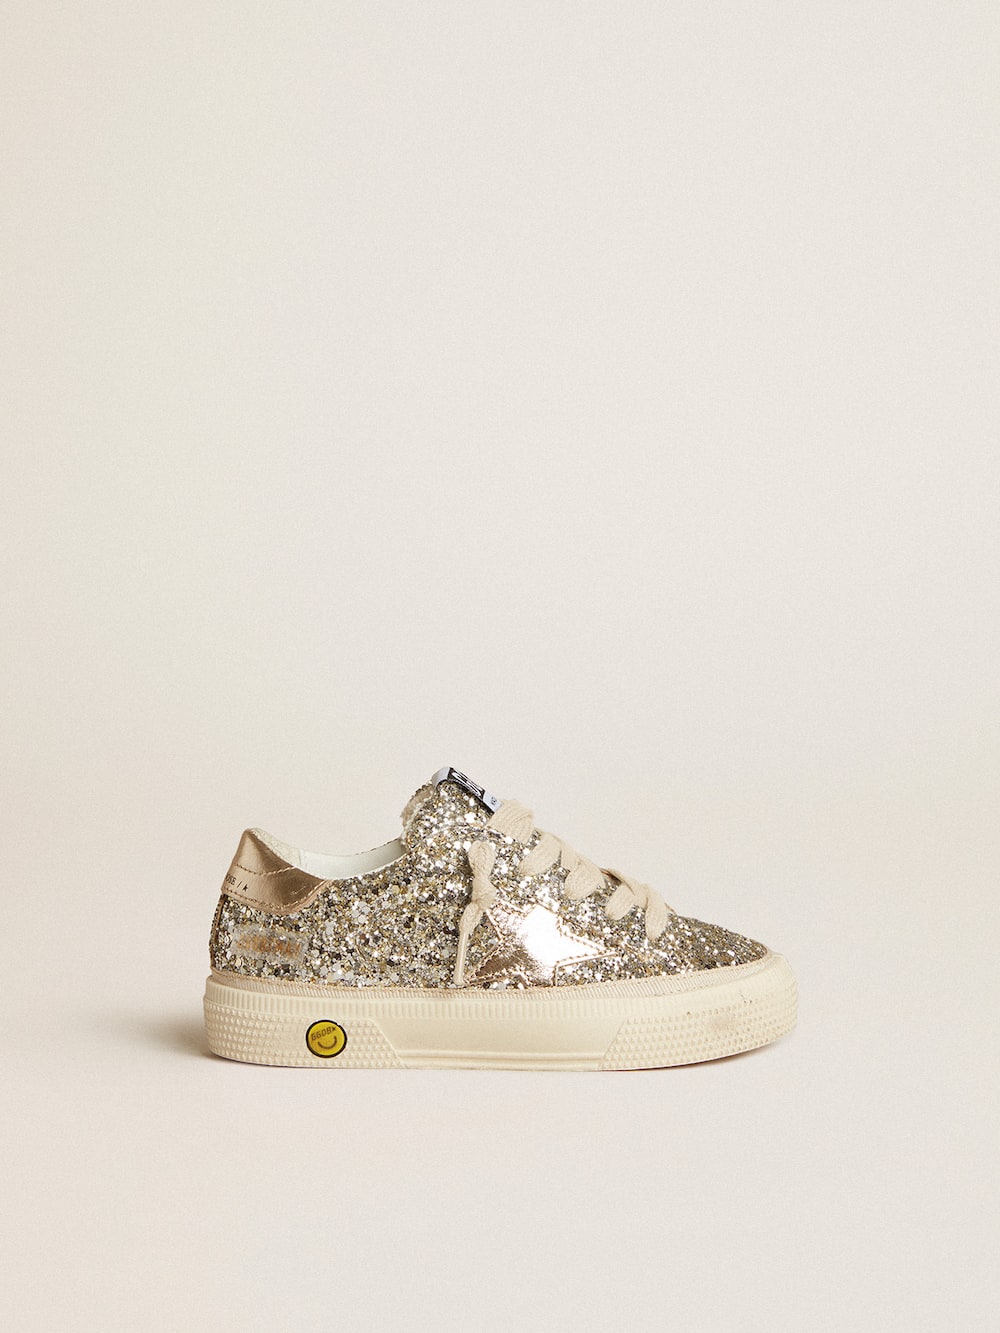 Golden Goose - May Junior in platinum glitter with metallic leather star and heel tab in 